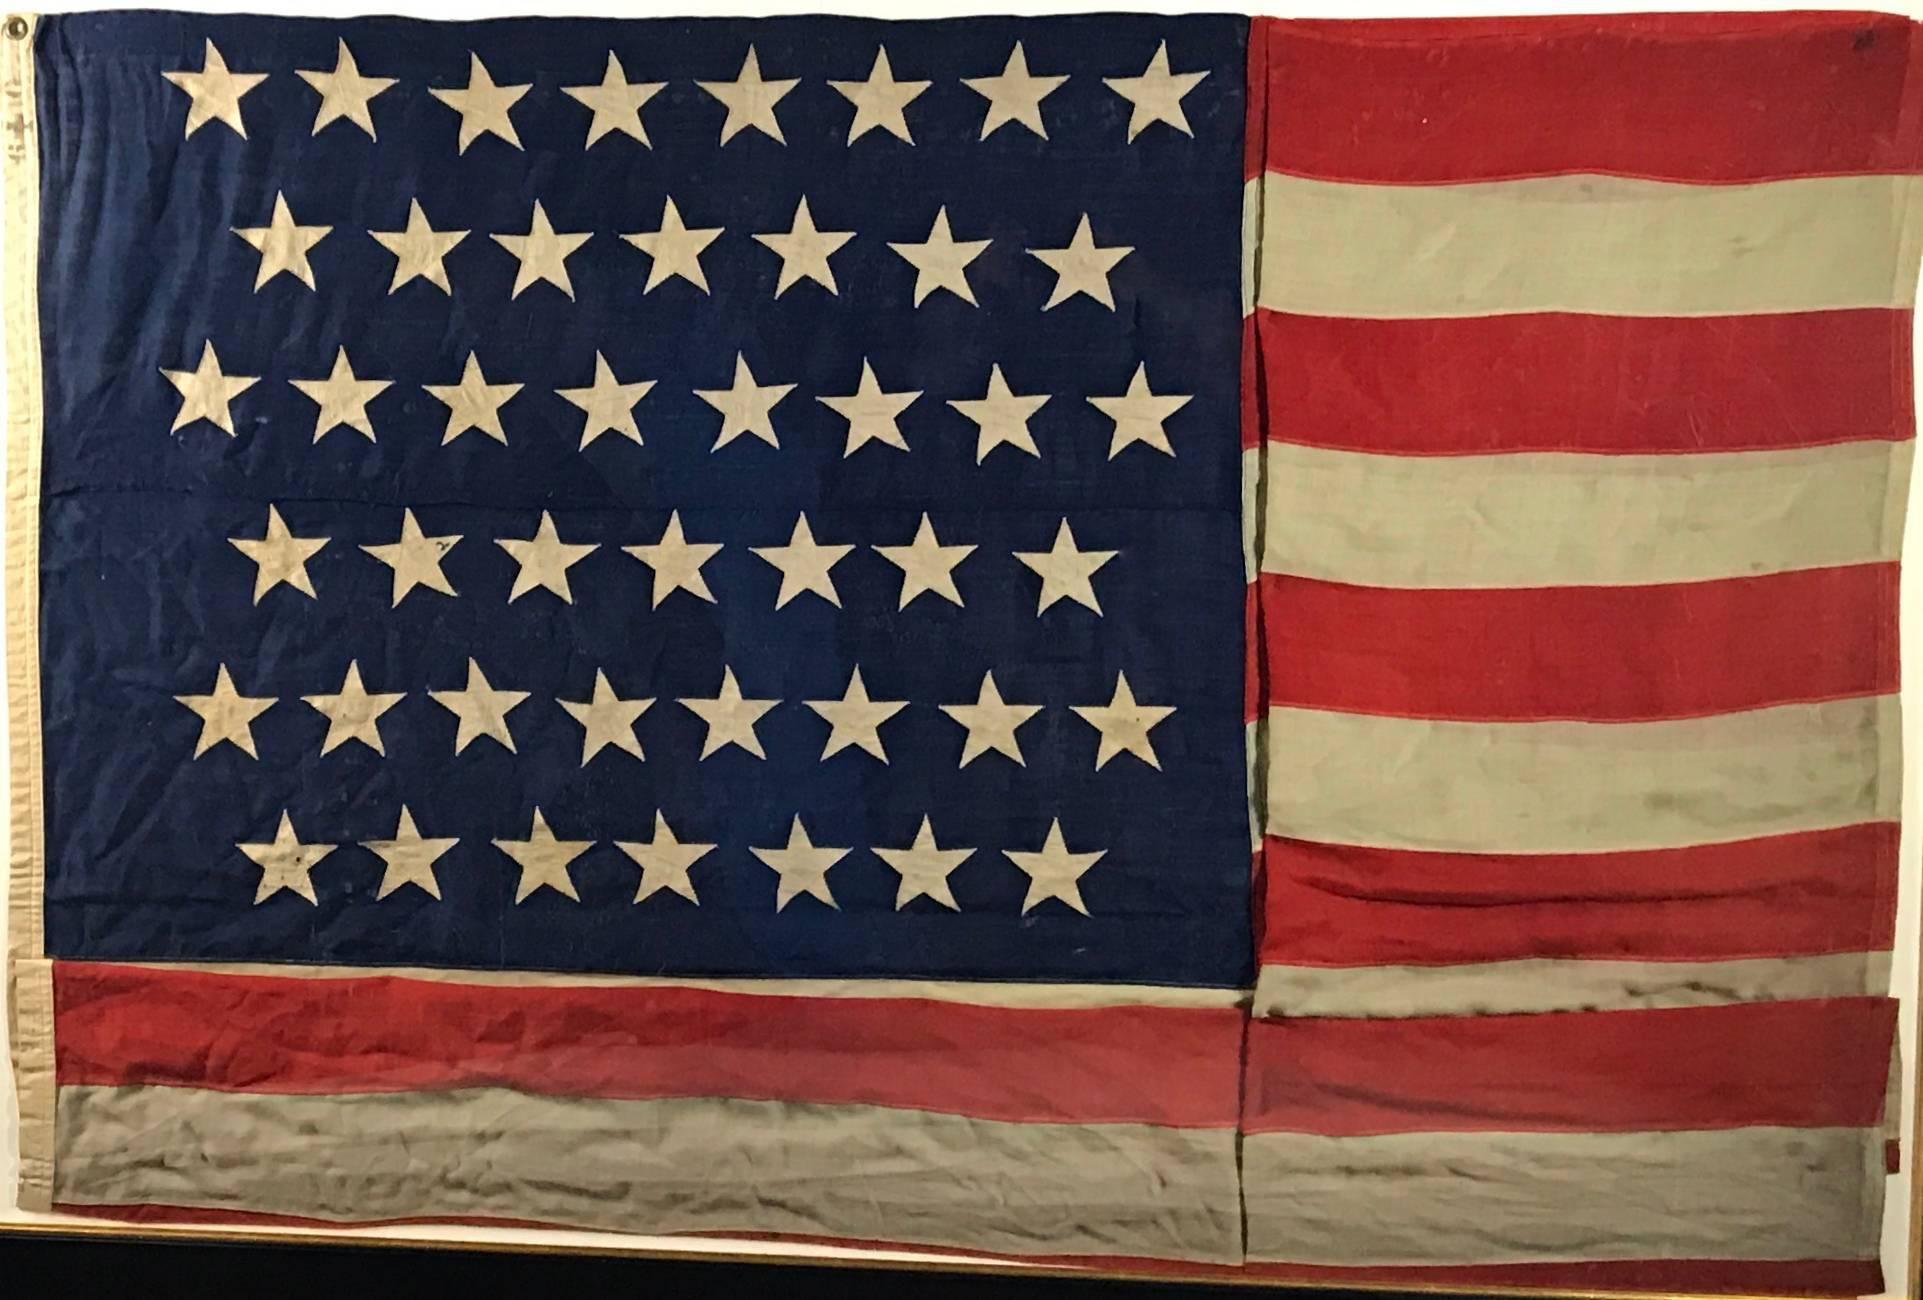 Large framed antique 45 star flag, circa 1896.
Frame size 56 high and 80 wide. Museum framing with UV acrylic.
45 star flags are popular due to the connection with Teddy Roosevelt and the rough riders serving in The Spanish American War. The flag